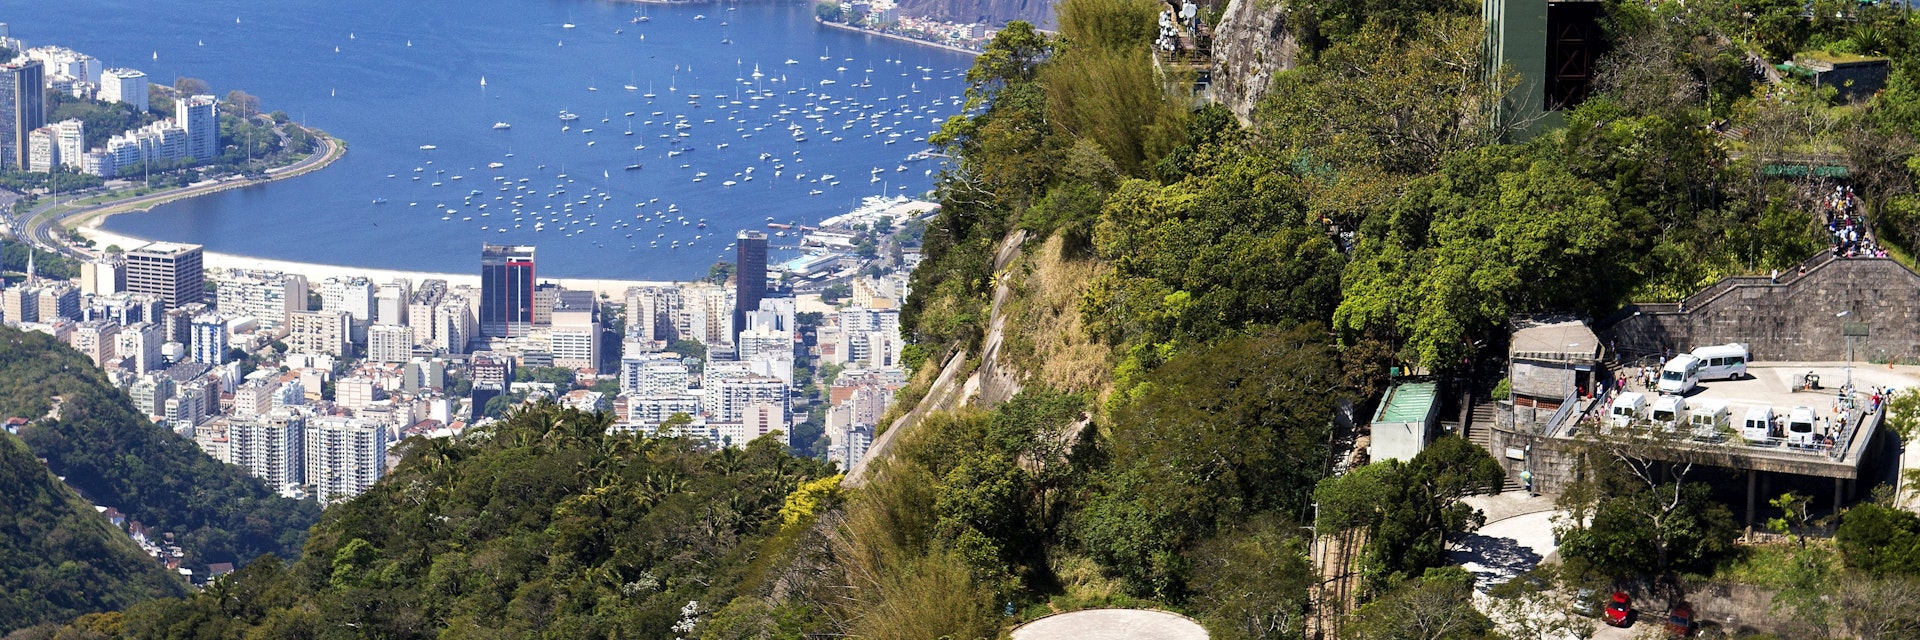 An aerial view of Rio de Janeiro and.the statue of Christ the Redeemer.